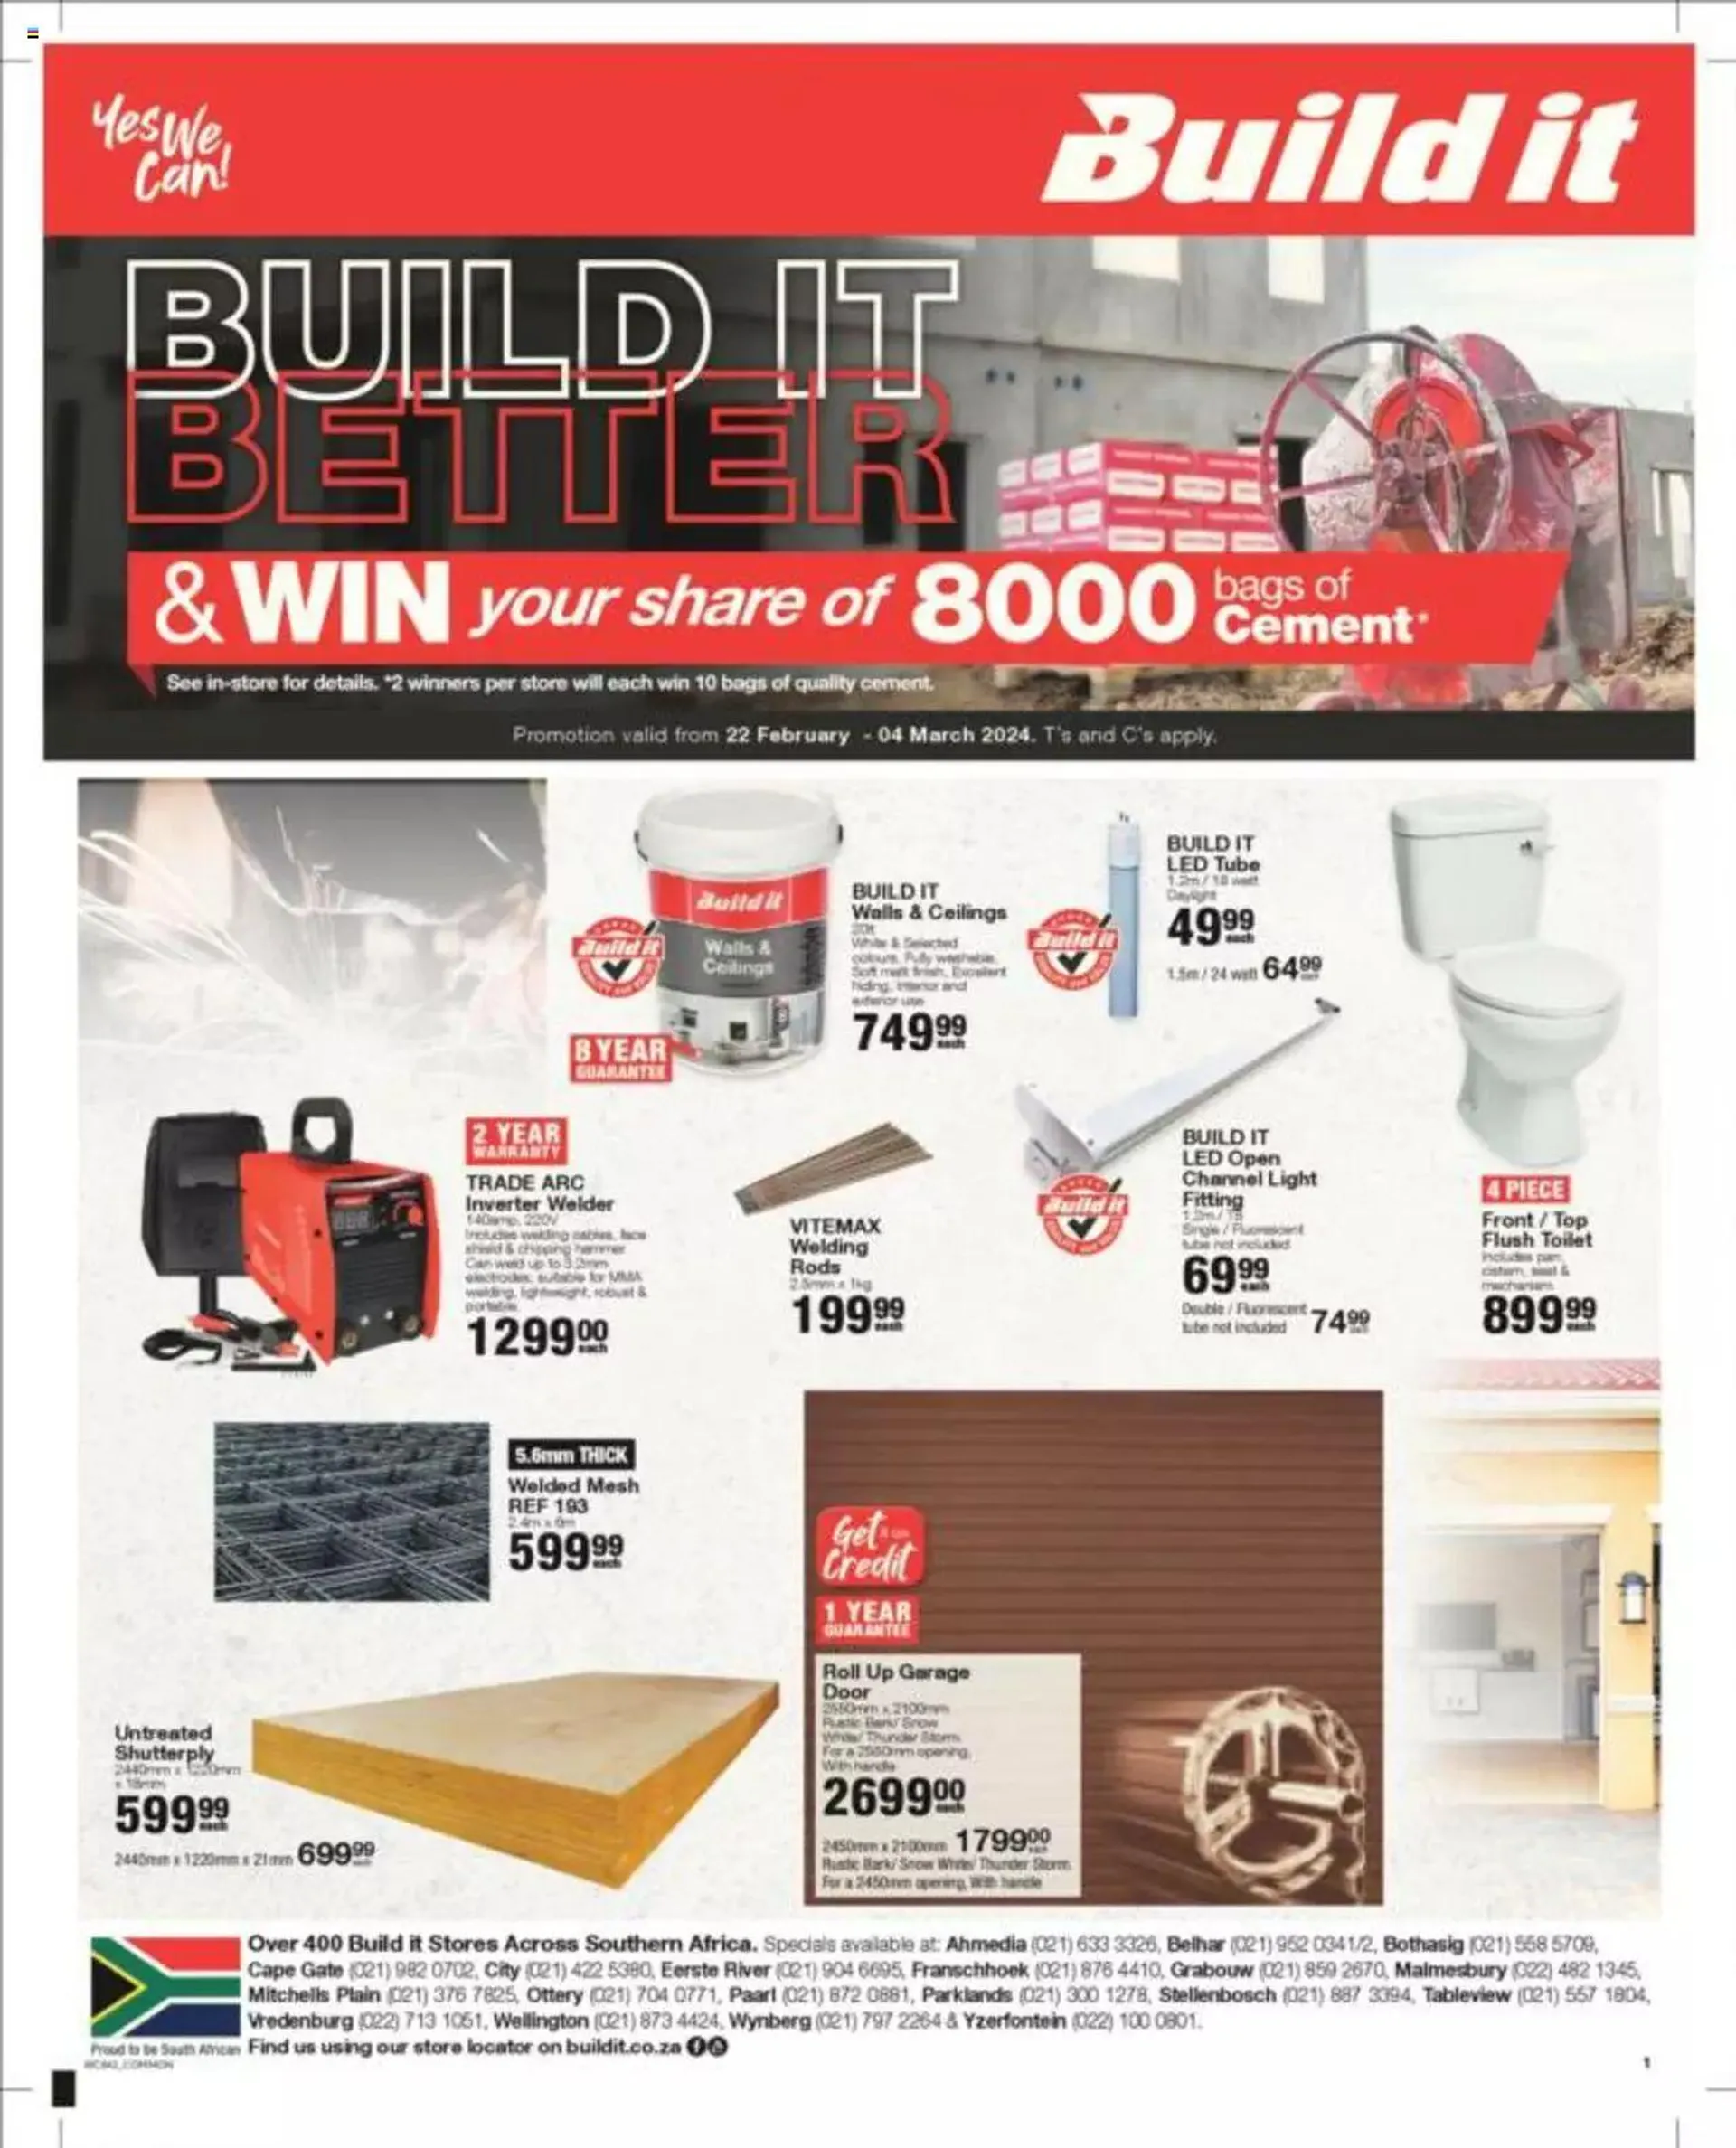 Build It Western Cape - Specials - 22 February 4 March 2024